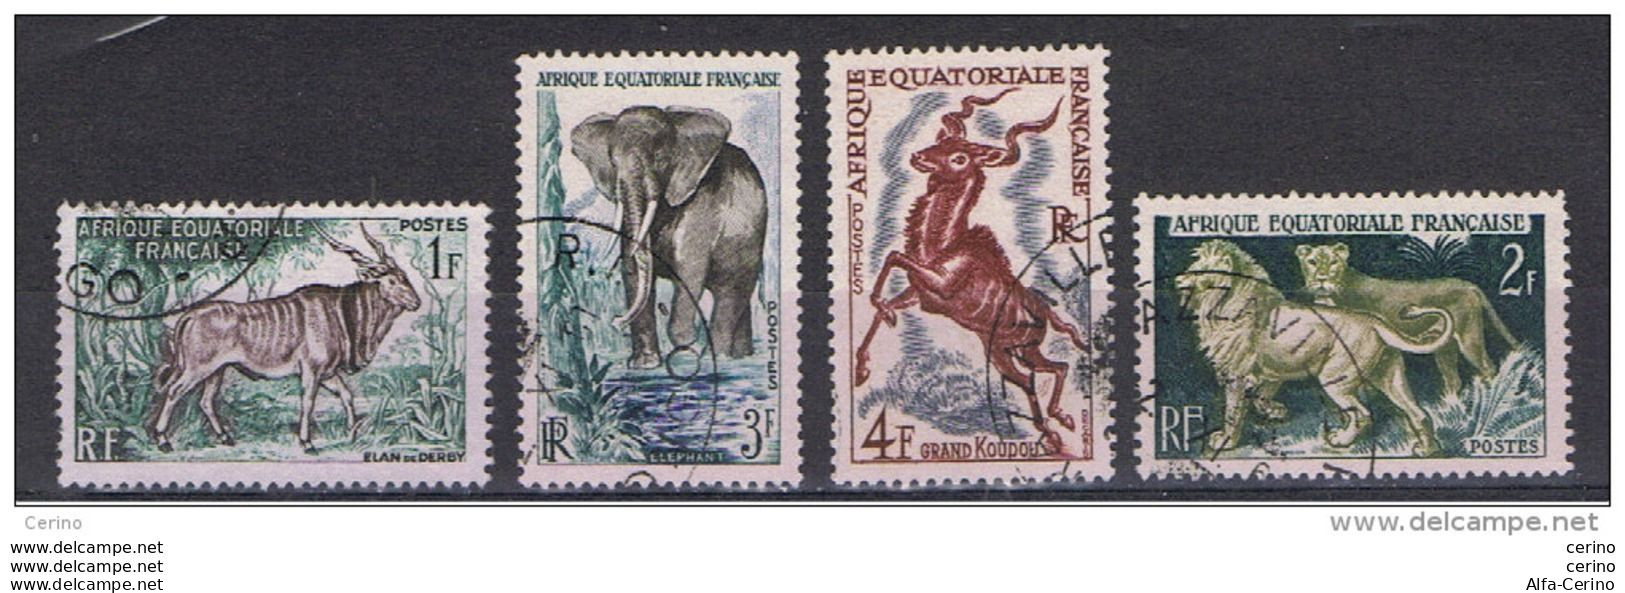 AFR..EQUATORIALE  FRANCESE:  1957  FAUNA  AFRICANA  -  S. CPL. 4  VAL. US. -  YV/TELL. 238/41 - Gebruikt